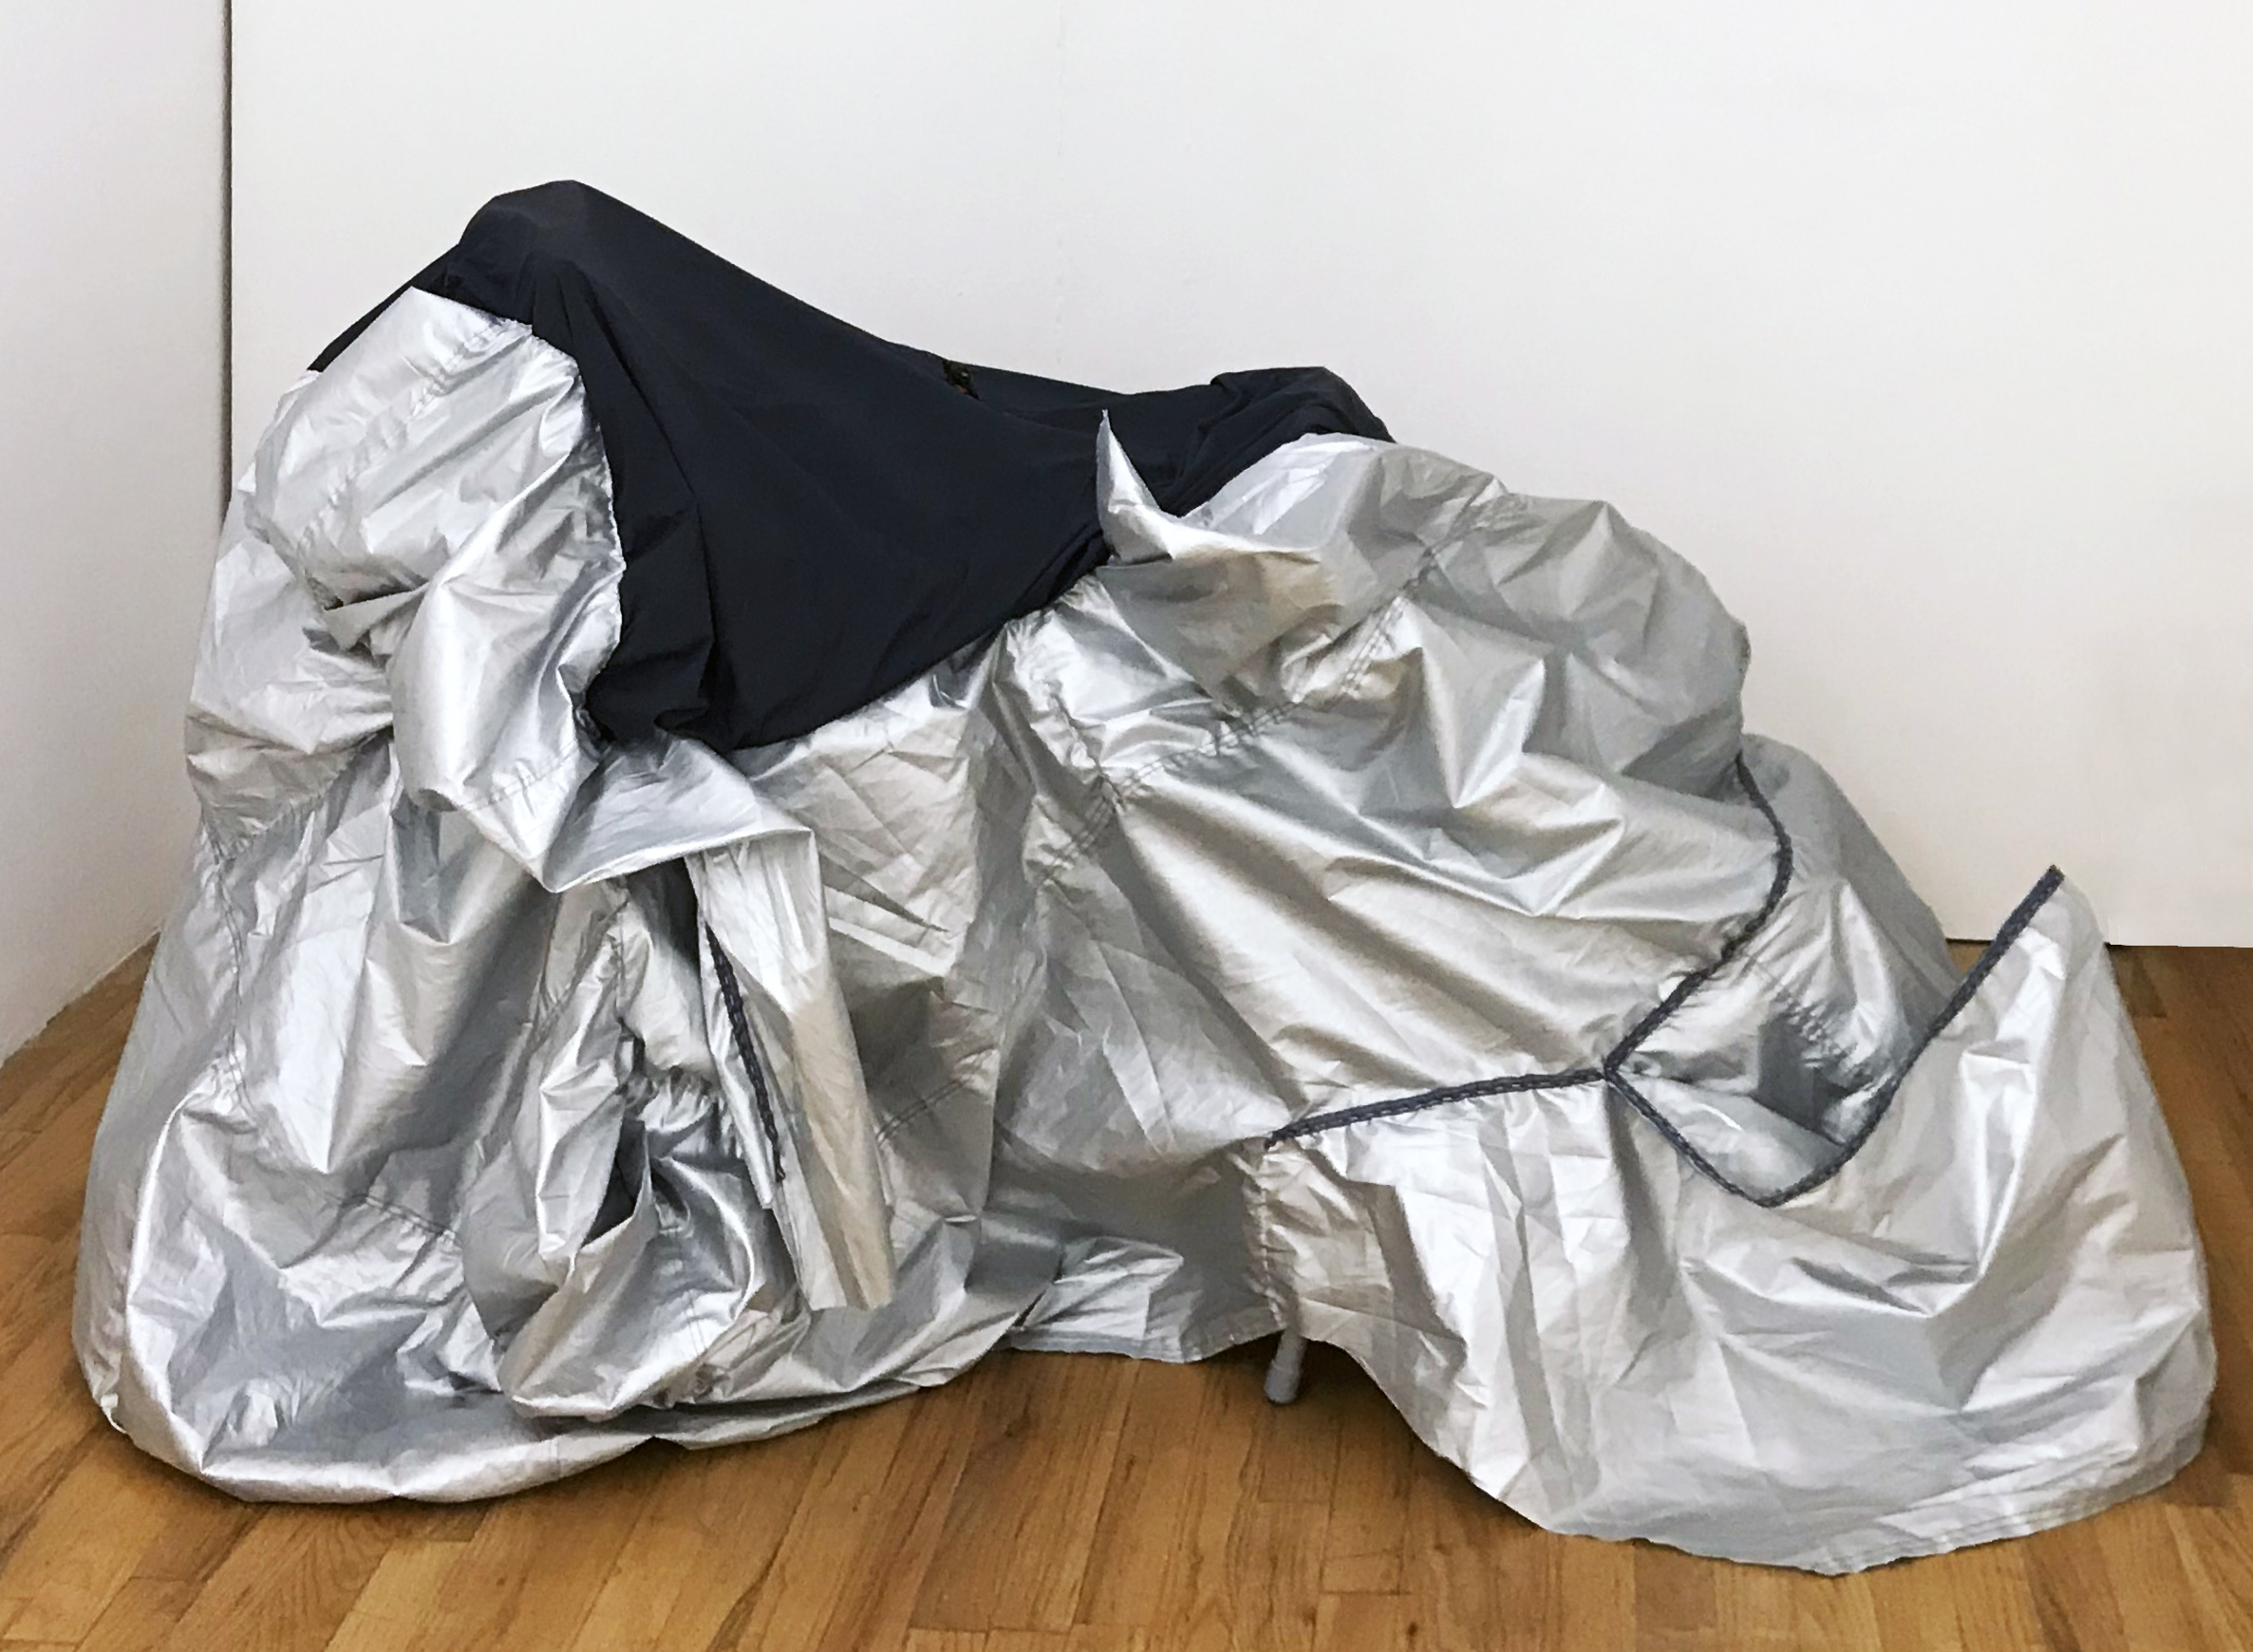  Laura Hunt,  Motorcycle Cover 3 , 2018, silk velvet, nylon, and three altered motorcycle covers with hand-sewing, approximately 66 x 42 inches, dimensions variable. 